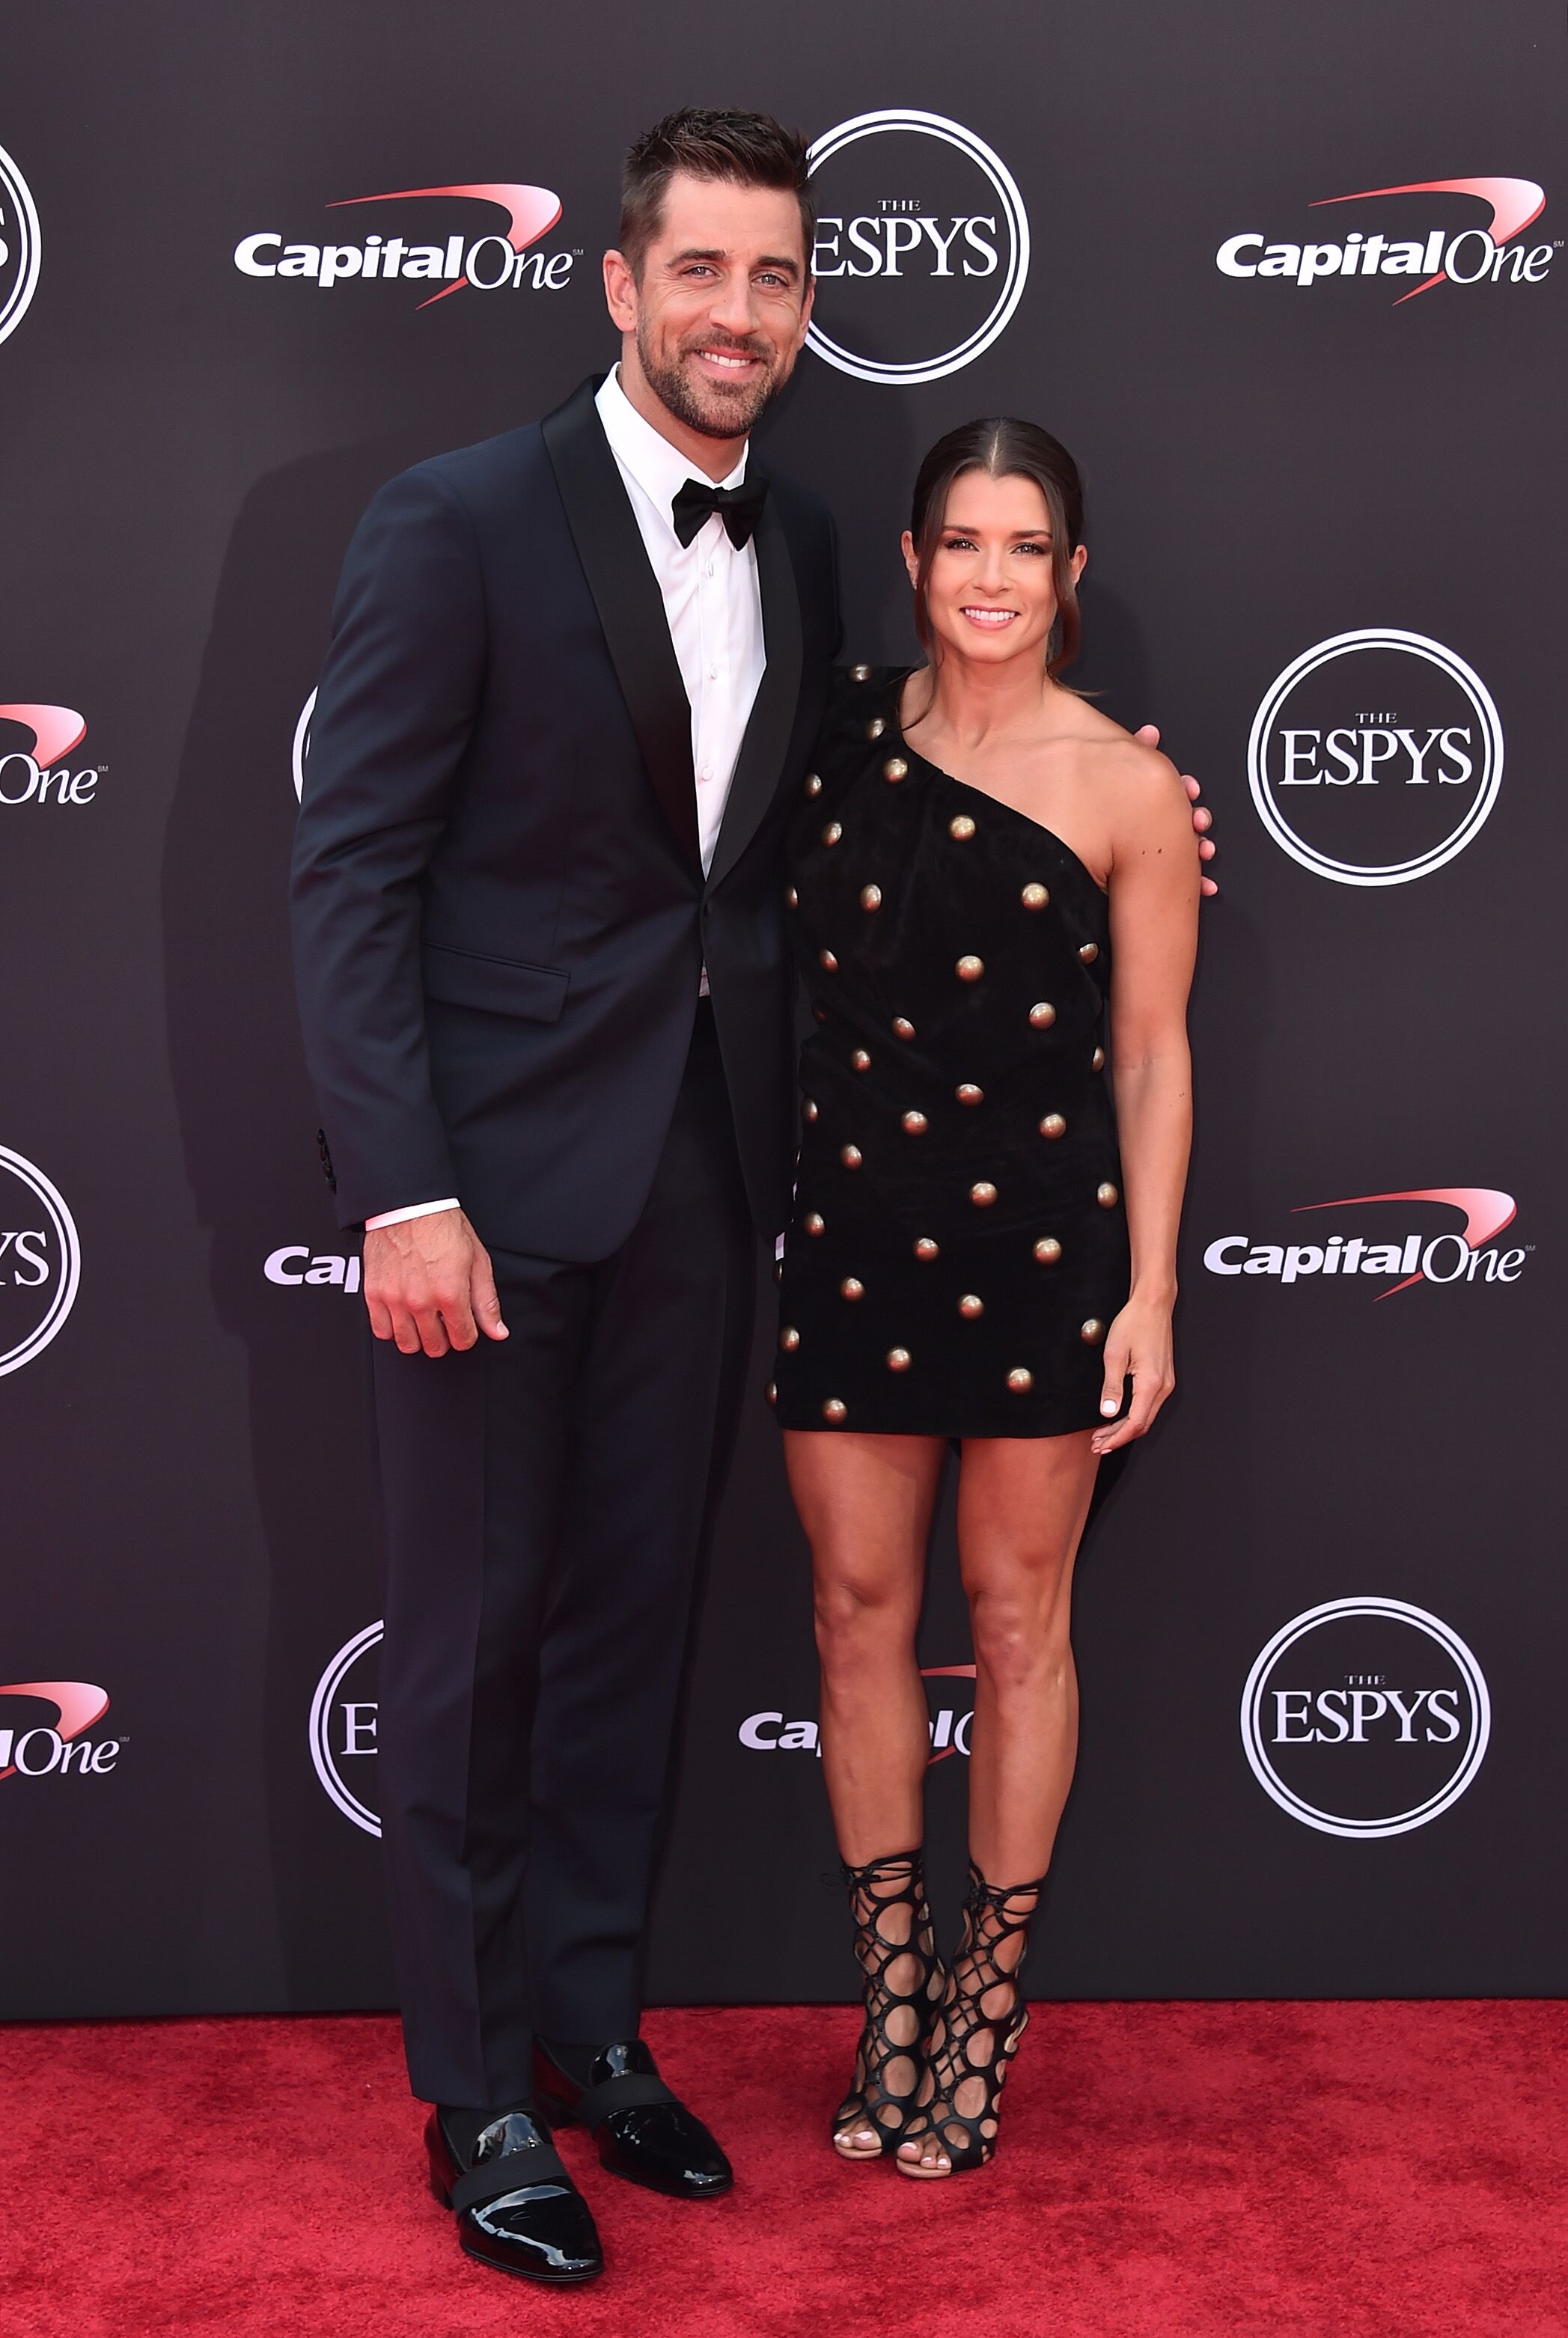 Aaron Rodgers and Danica Patrick attend The 2018 ESPYS at Microsoft Theater on July 18, 2018 | Photo: Getty Images